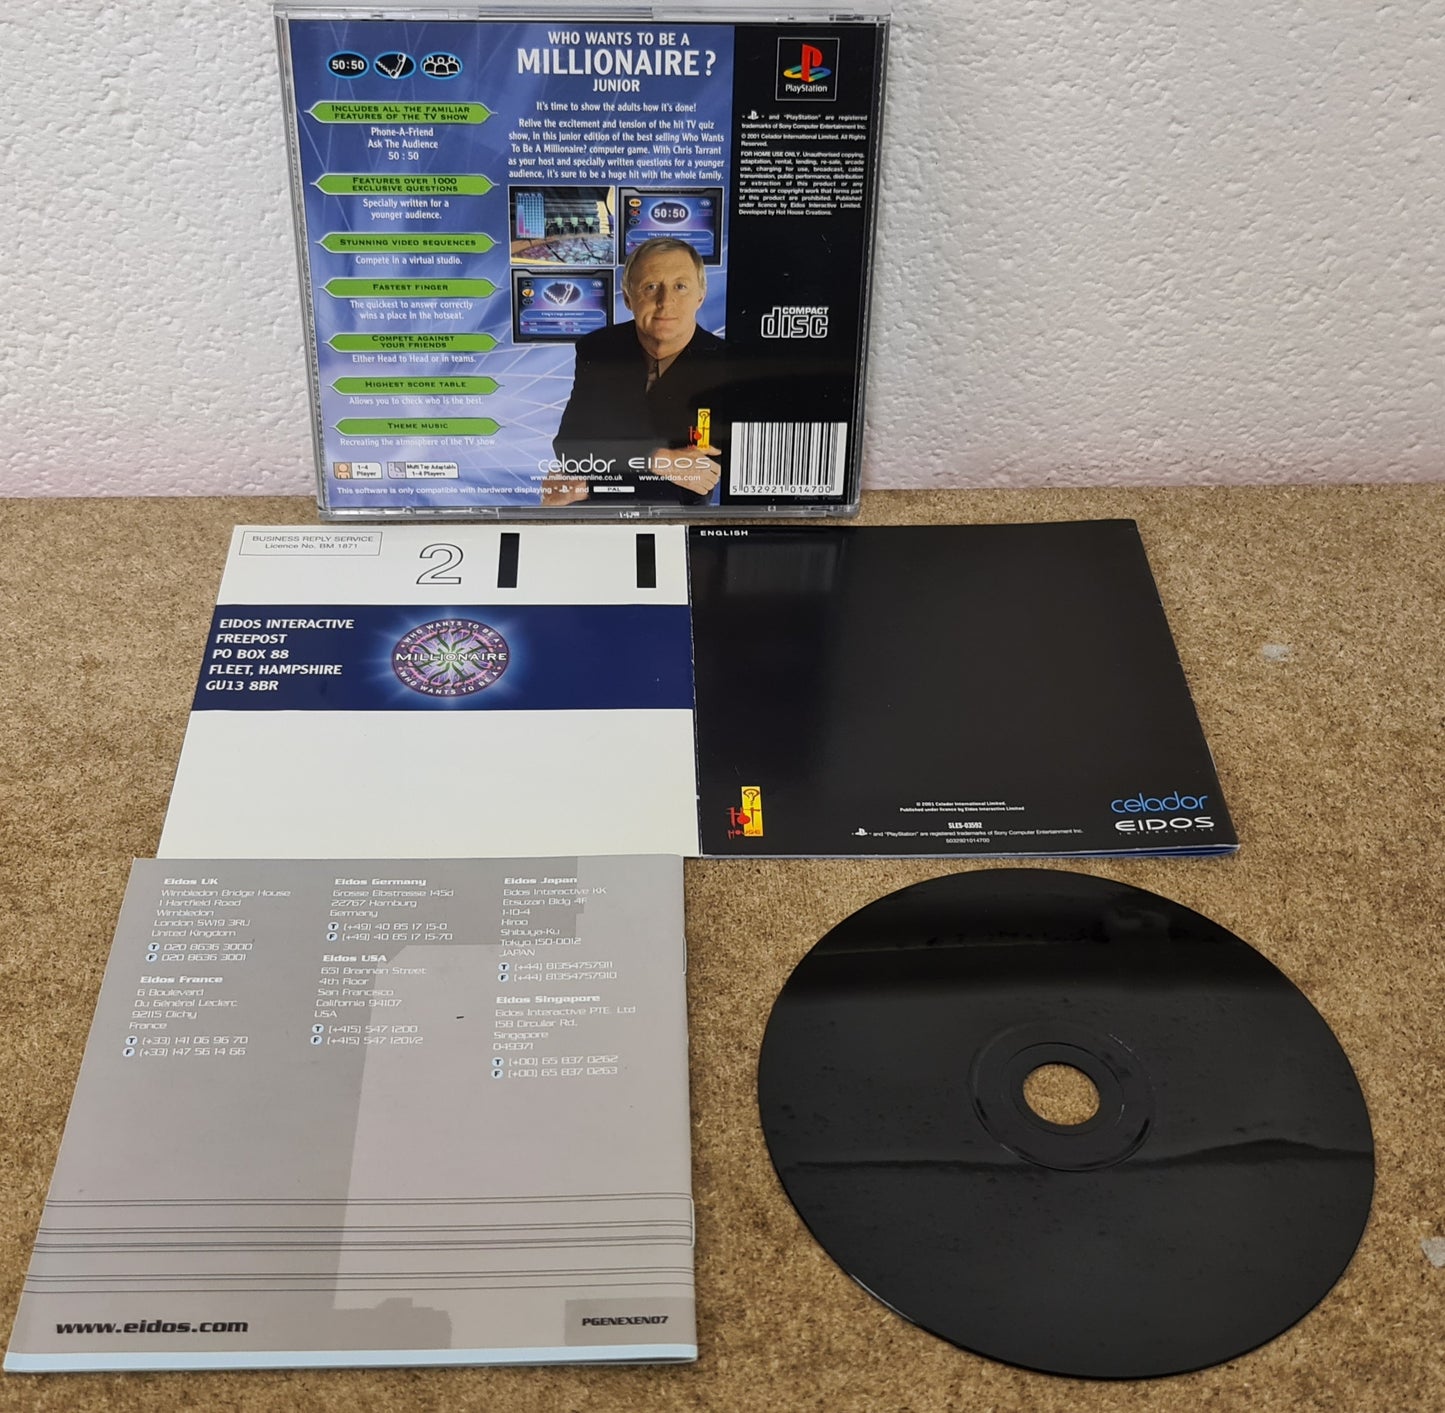 Who Wants to be a Millionaire Junior Sony Playstation 1 (PS1) Game